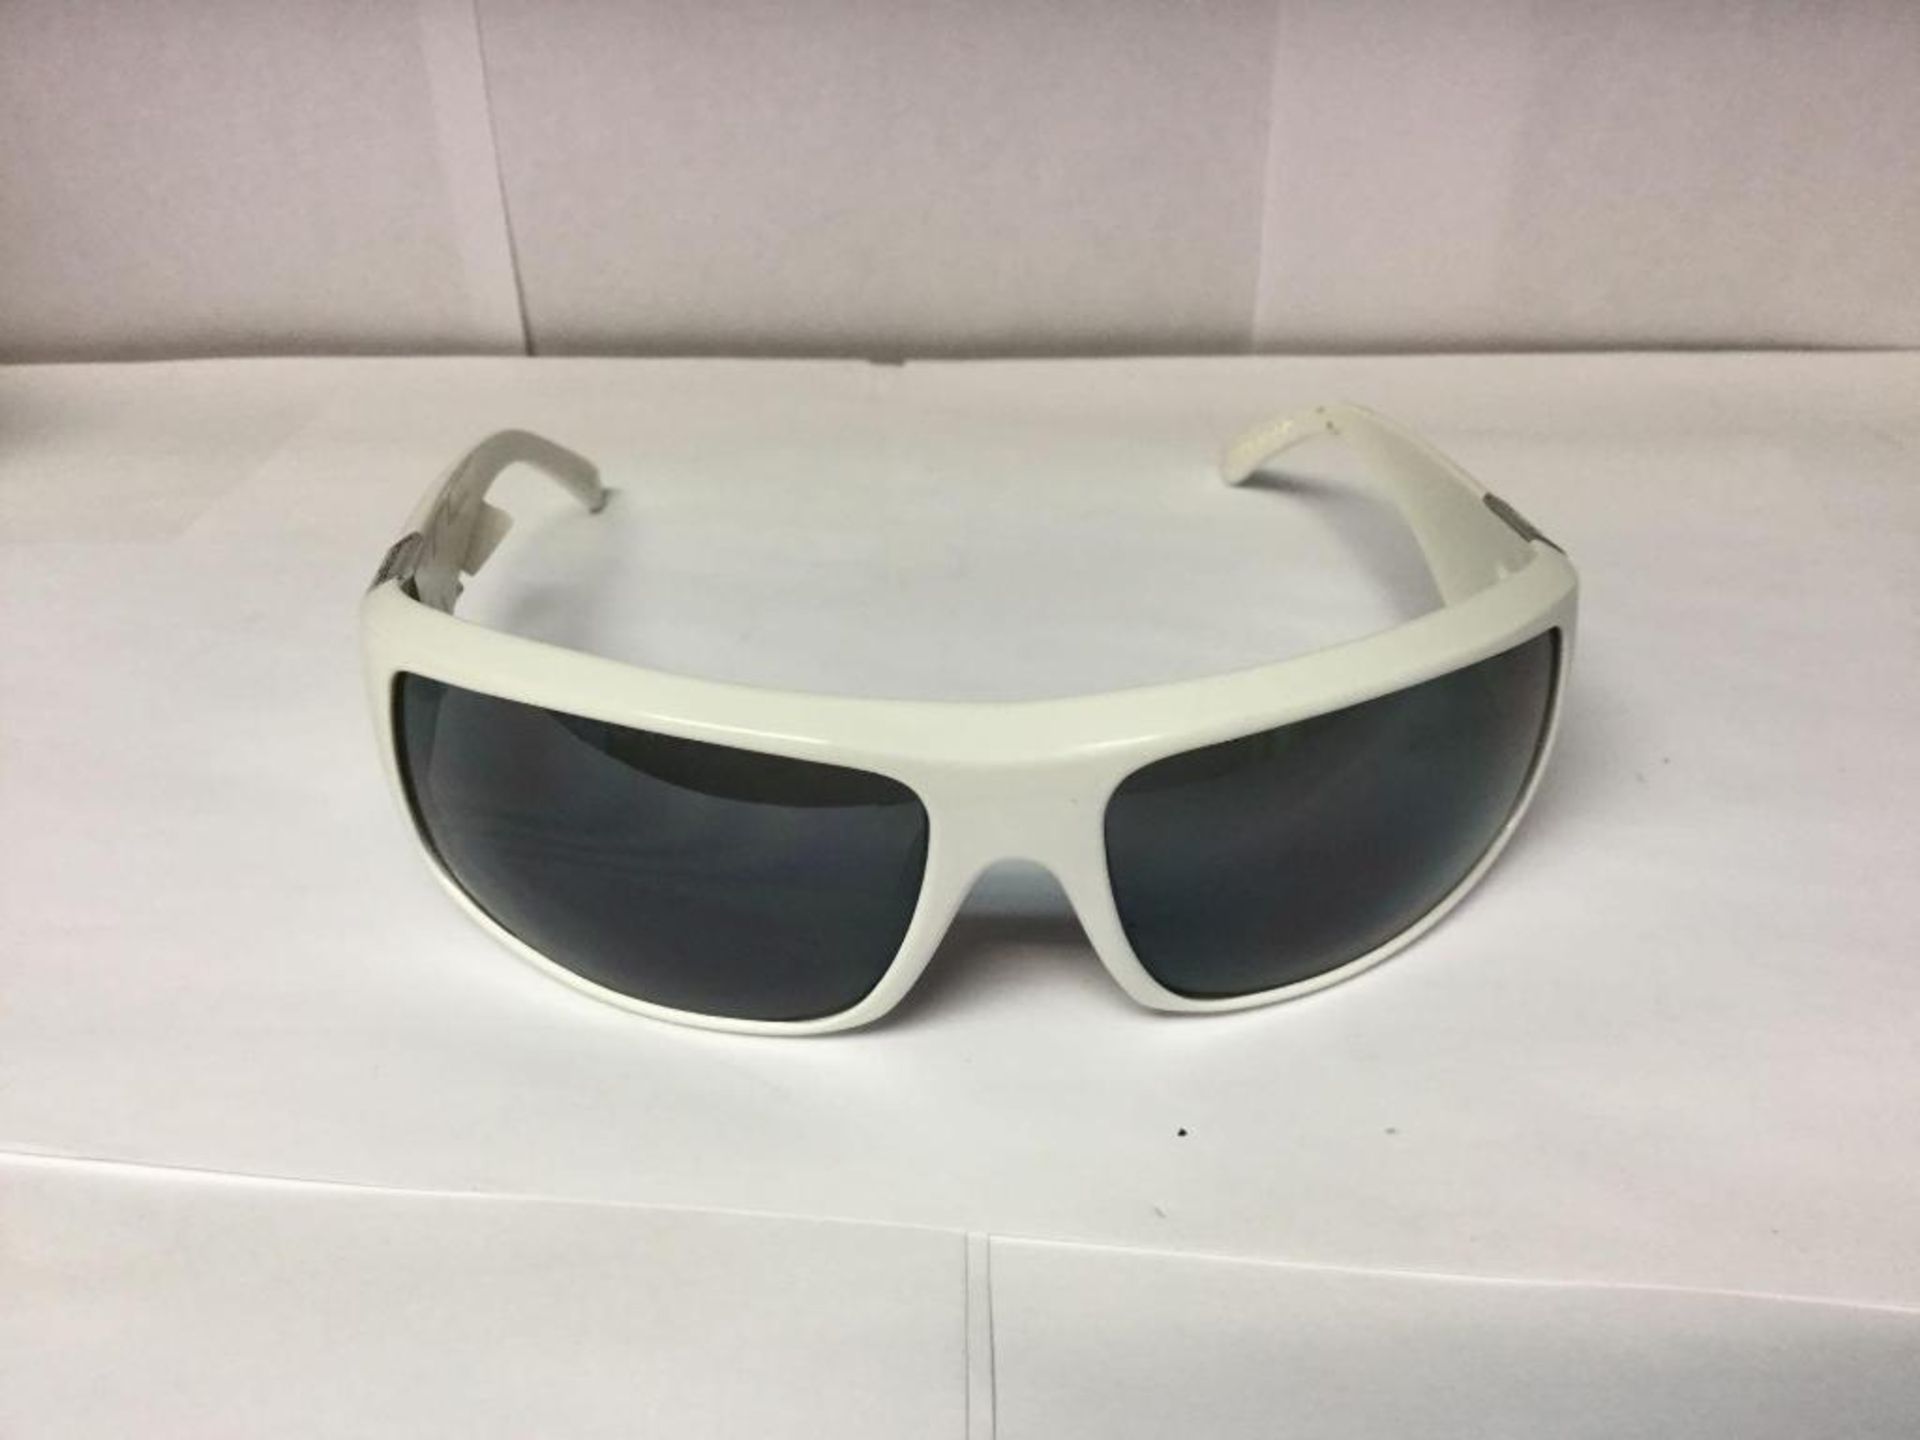 Tapout Sunglasses with Box and bag Value $ 90 - Image 3 of 3